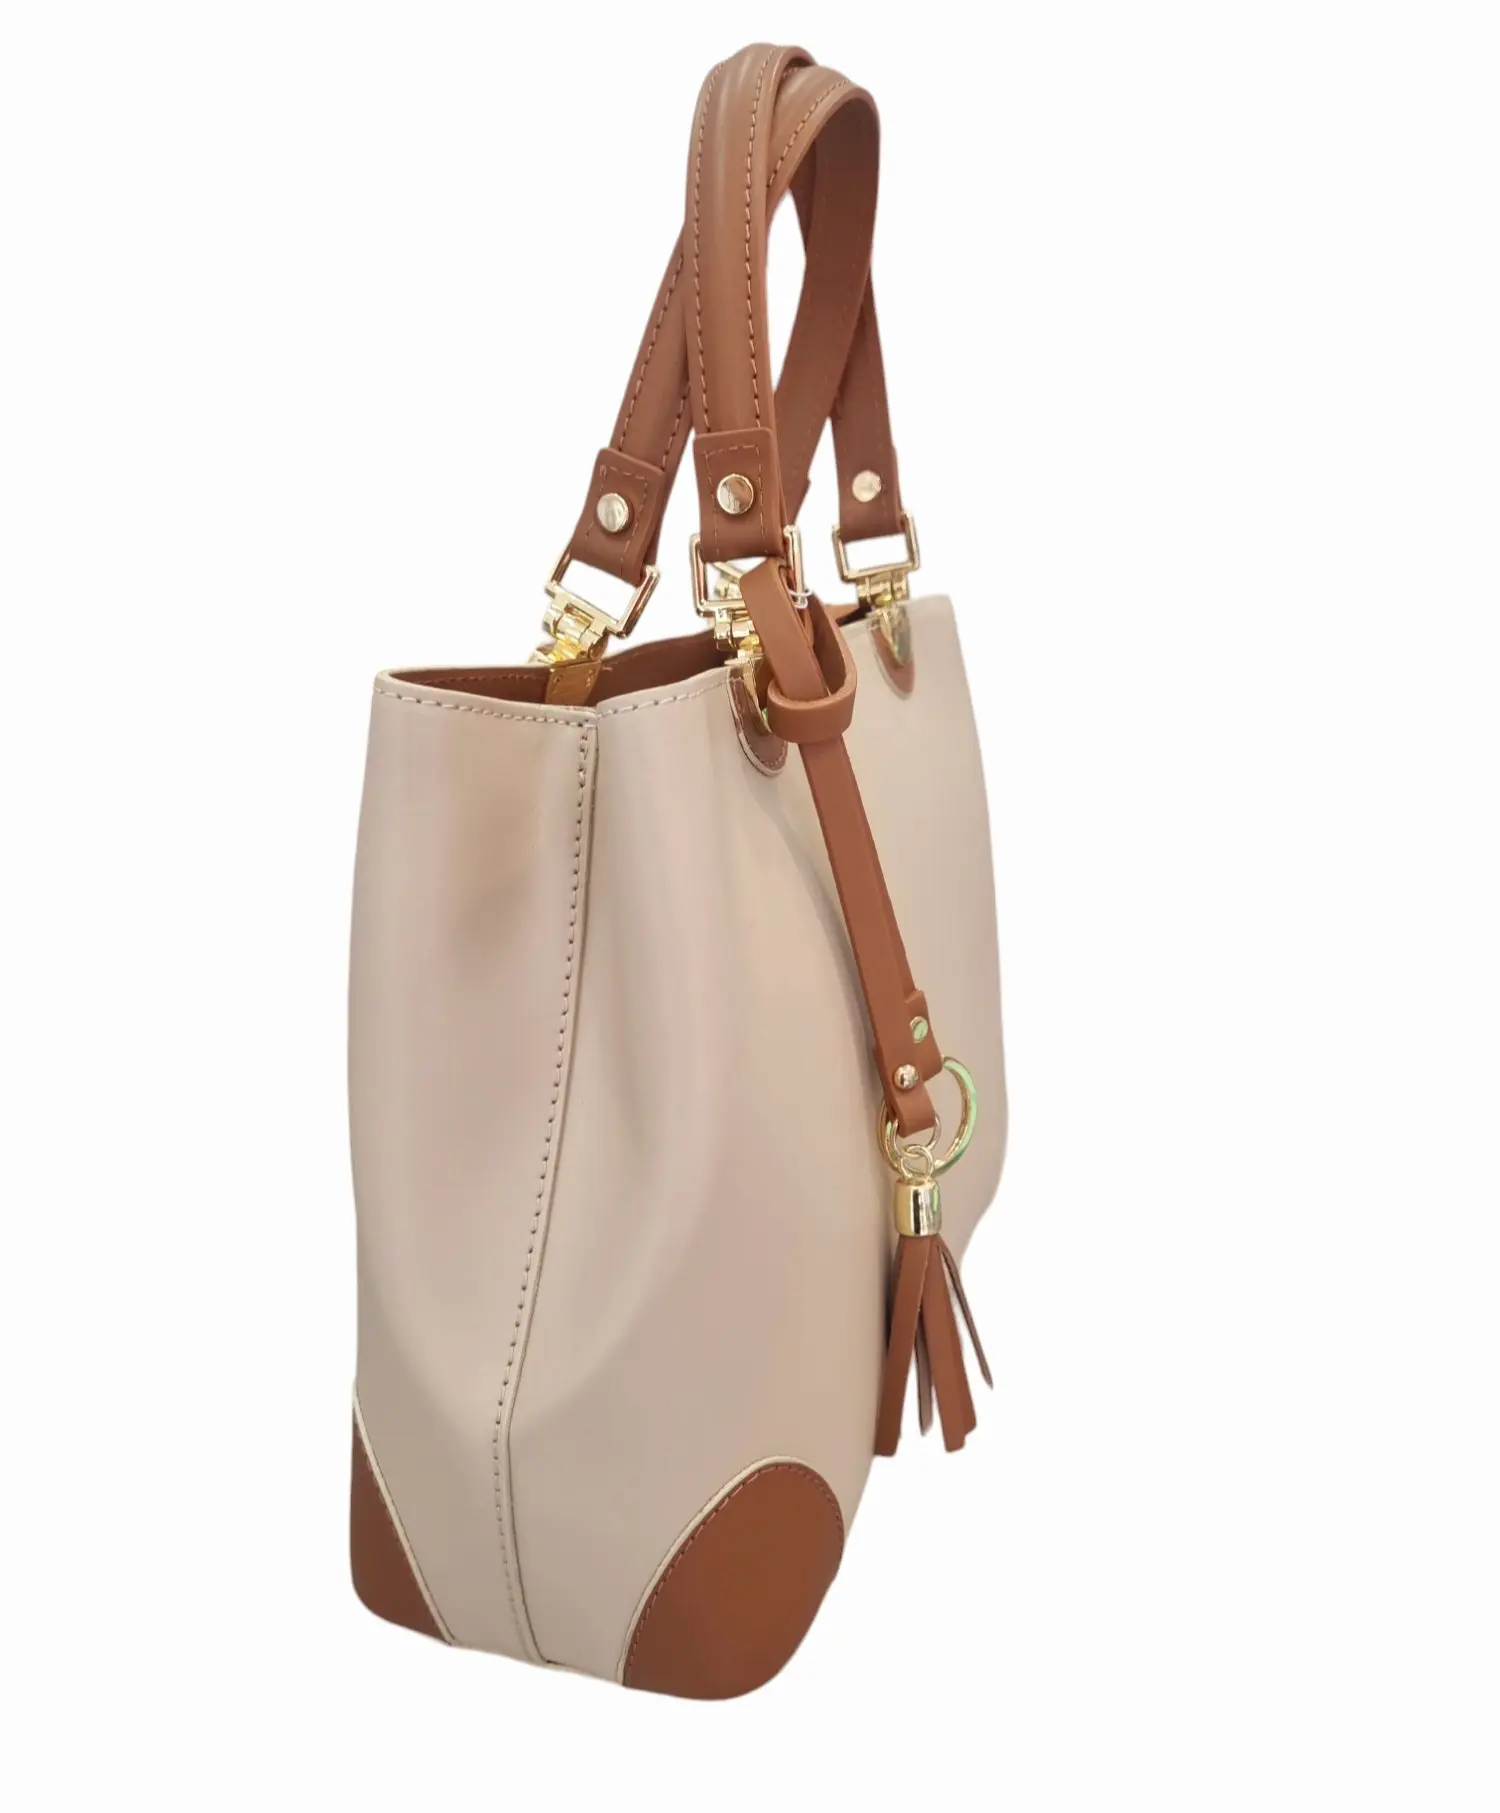 Genuine leather bag, made in Italy, beige and leather, equipped with shoulder strap with lined interior divided into three compartments and side pockets, zip closure, studs on the base, measures L 31 B12 H24